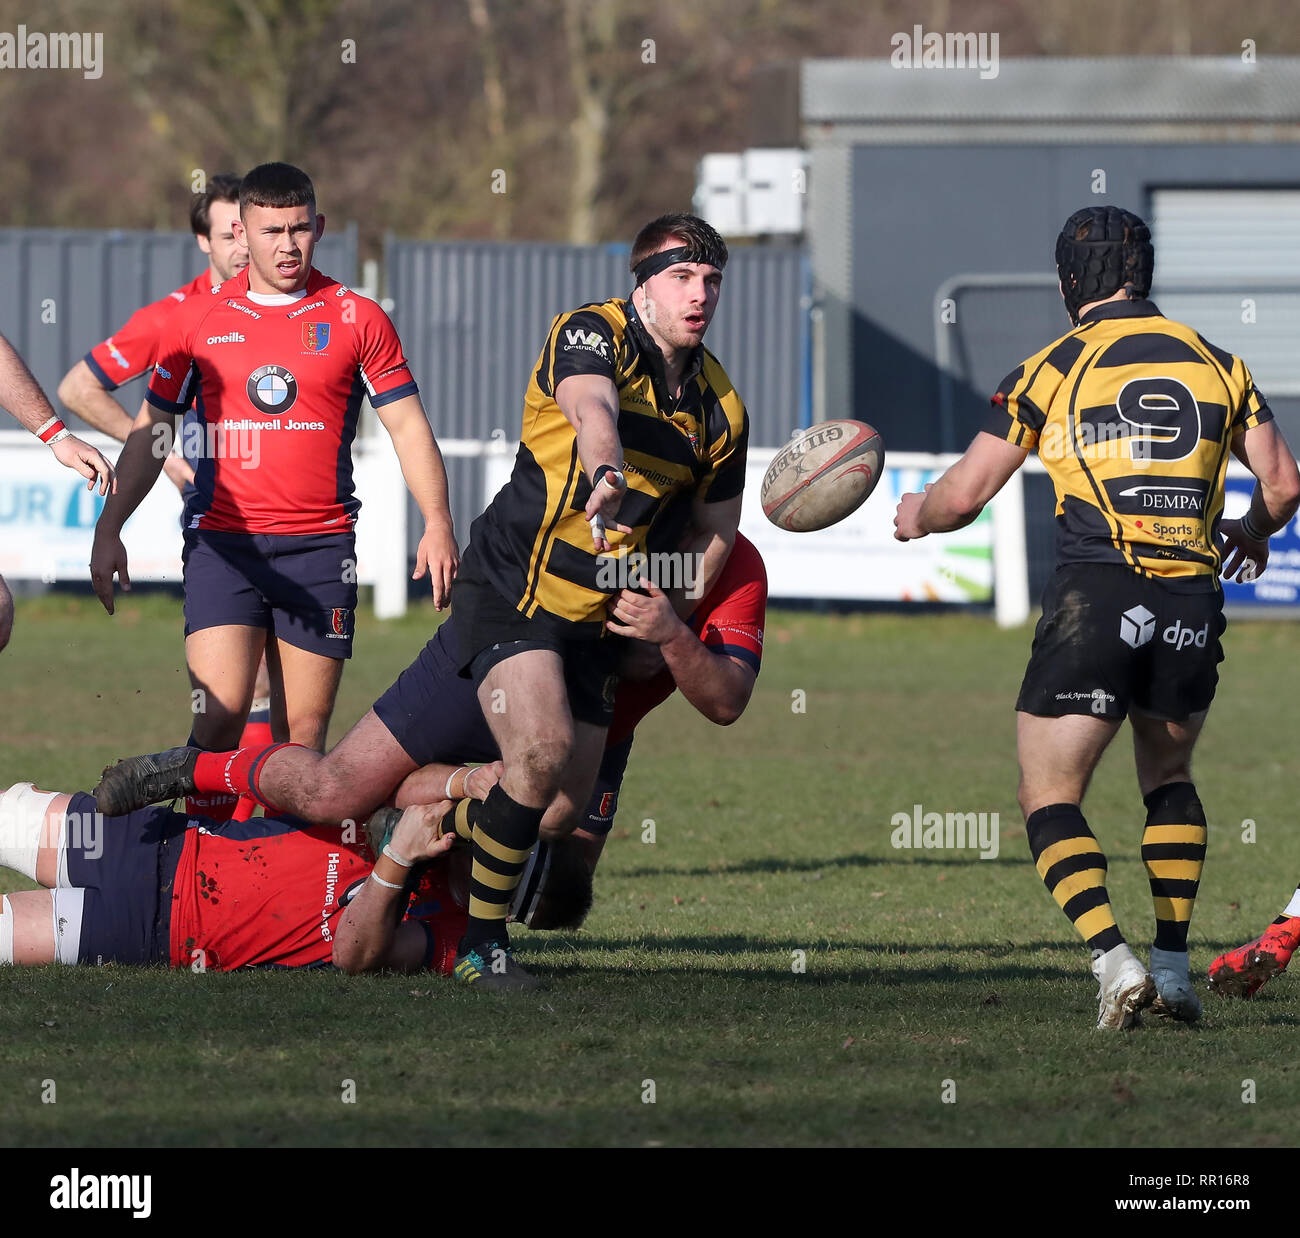 23.02.2019 Hinckley, Leicester, England. Rugby Union, Hinckley rfc v Chester rfc.  Michael Dickenson working hard in the loose for Hinckley during the Stock Photo